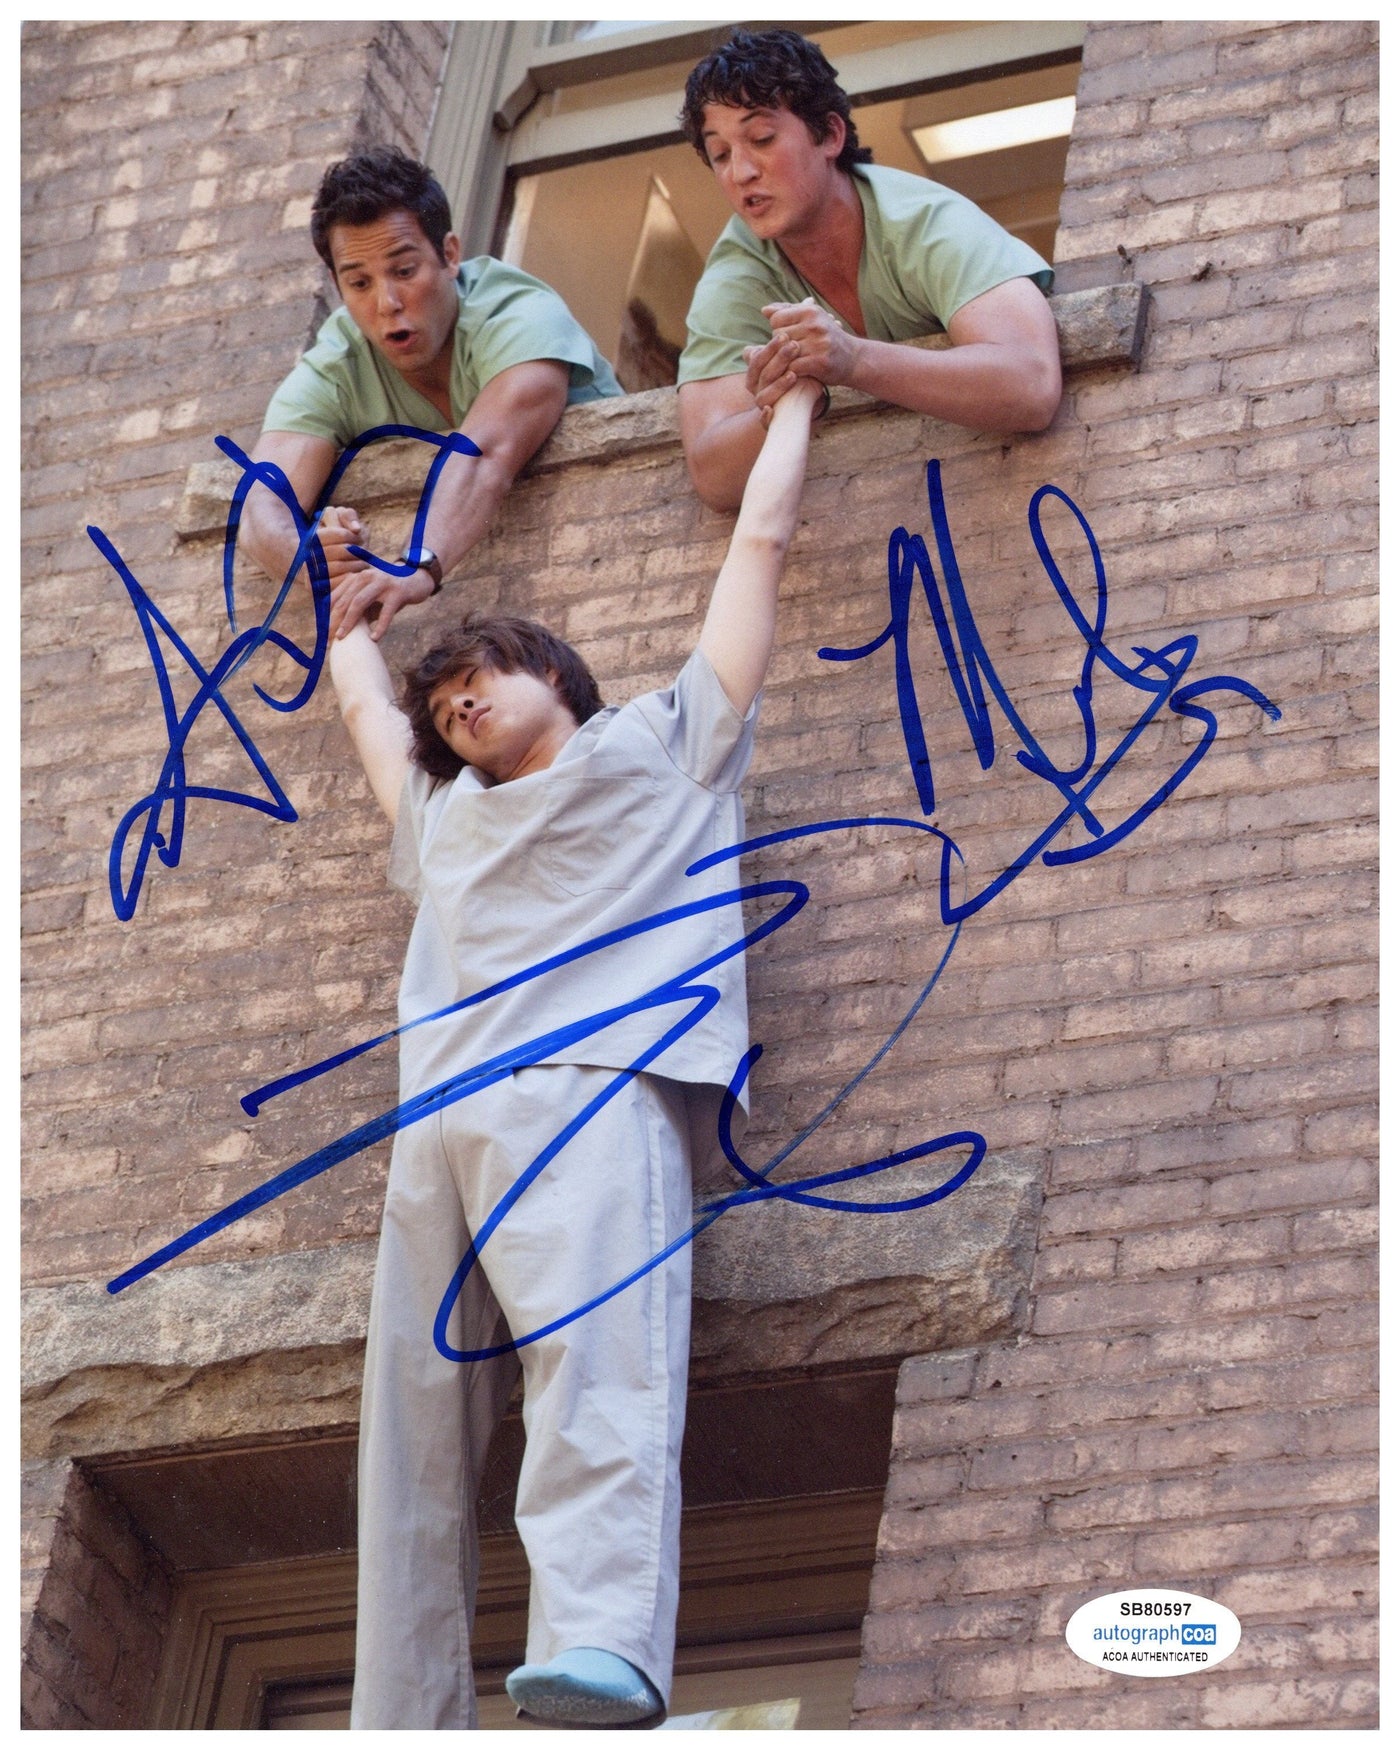 21 & Over Cast Signed 8x10 Photo Miles Teller Autographed ACOA